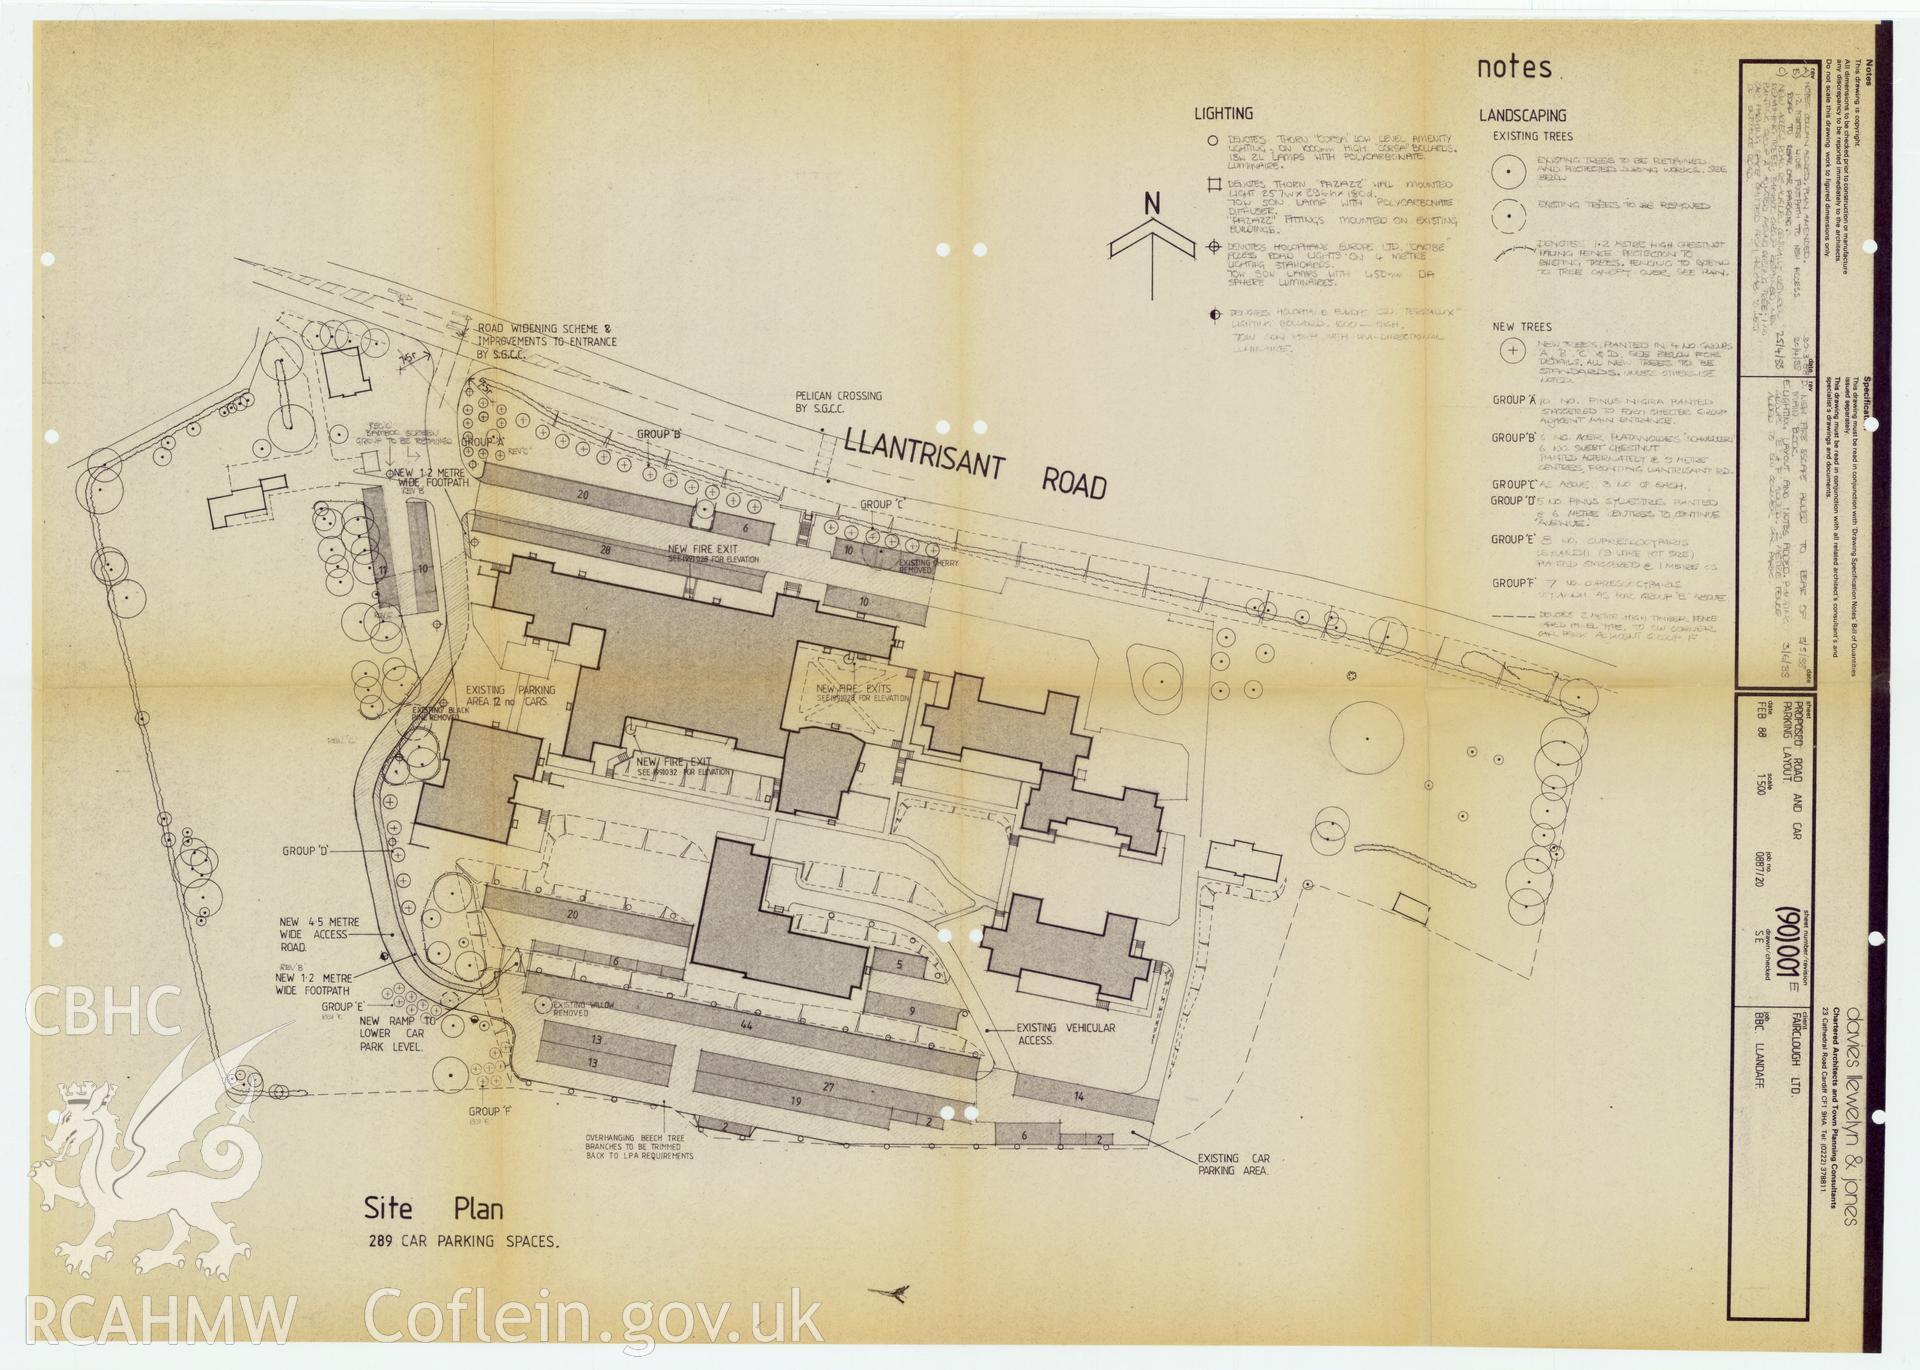 Digitised drawing plan of BBC Llandaff  - site plan of proposed road and car parking and list of trees in the landscape. Drawing no.0887/20. February 1988.